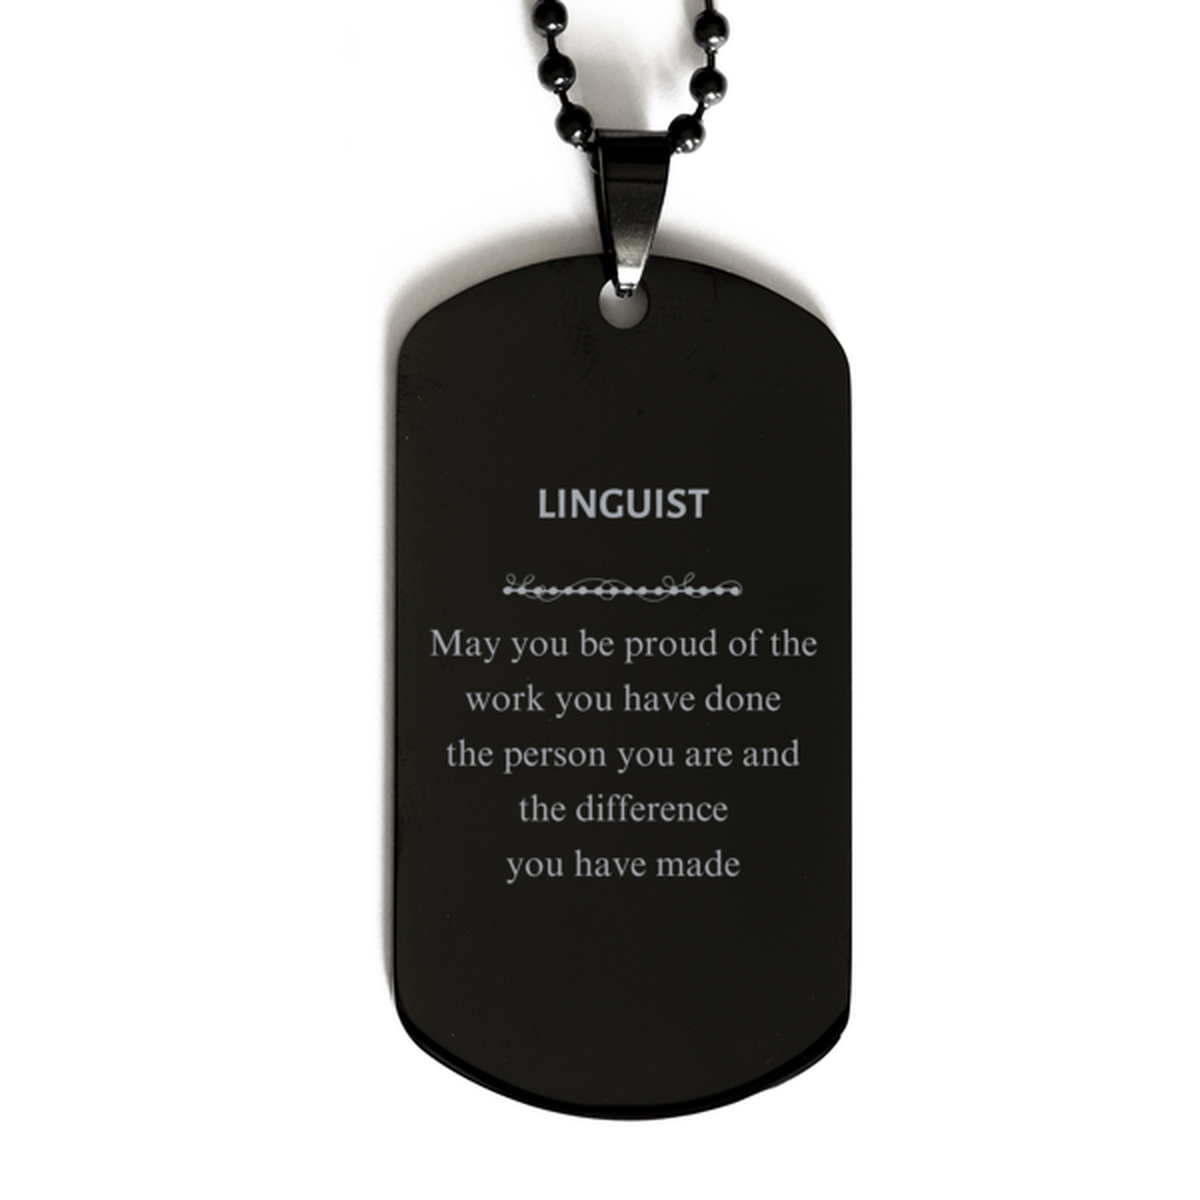 Linguist May you be proud of the work you have done, Retirement Linguist Black Dog Tag for Colleague Appreciation Gifts Amazing for Linguist